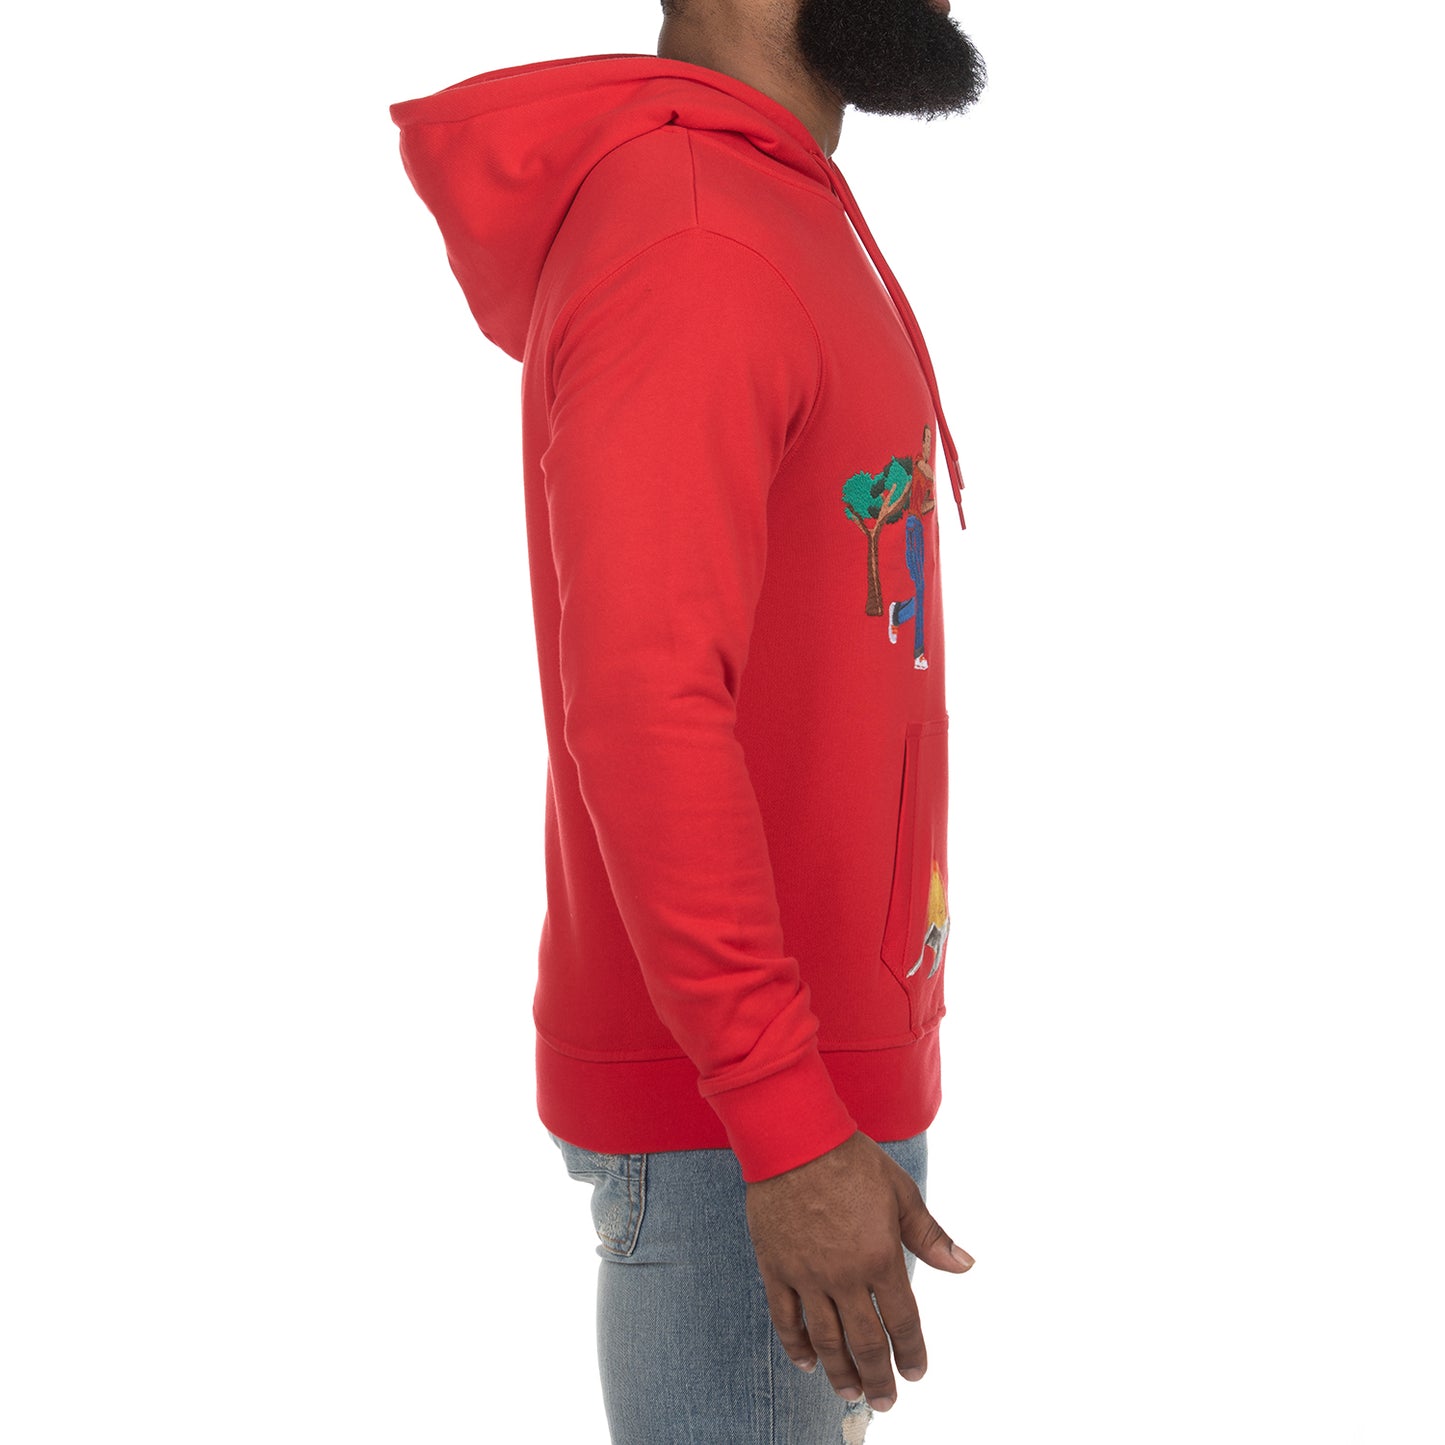 Vibrant Red Hoodie with Unique Graphic Designs - Comfortable and Stylish Men's Sweatshirt